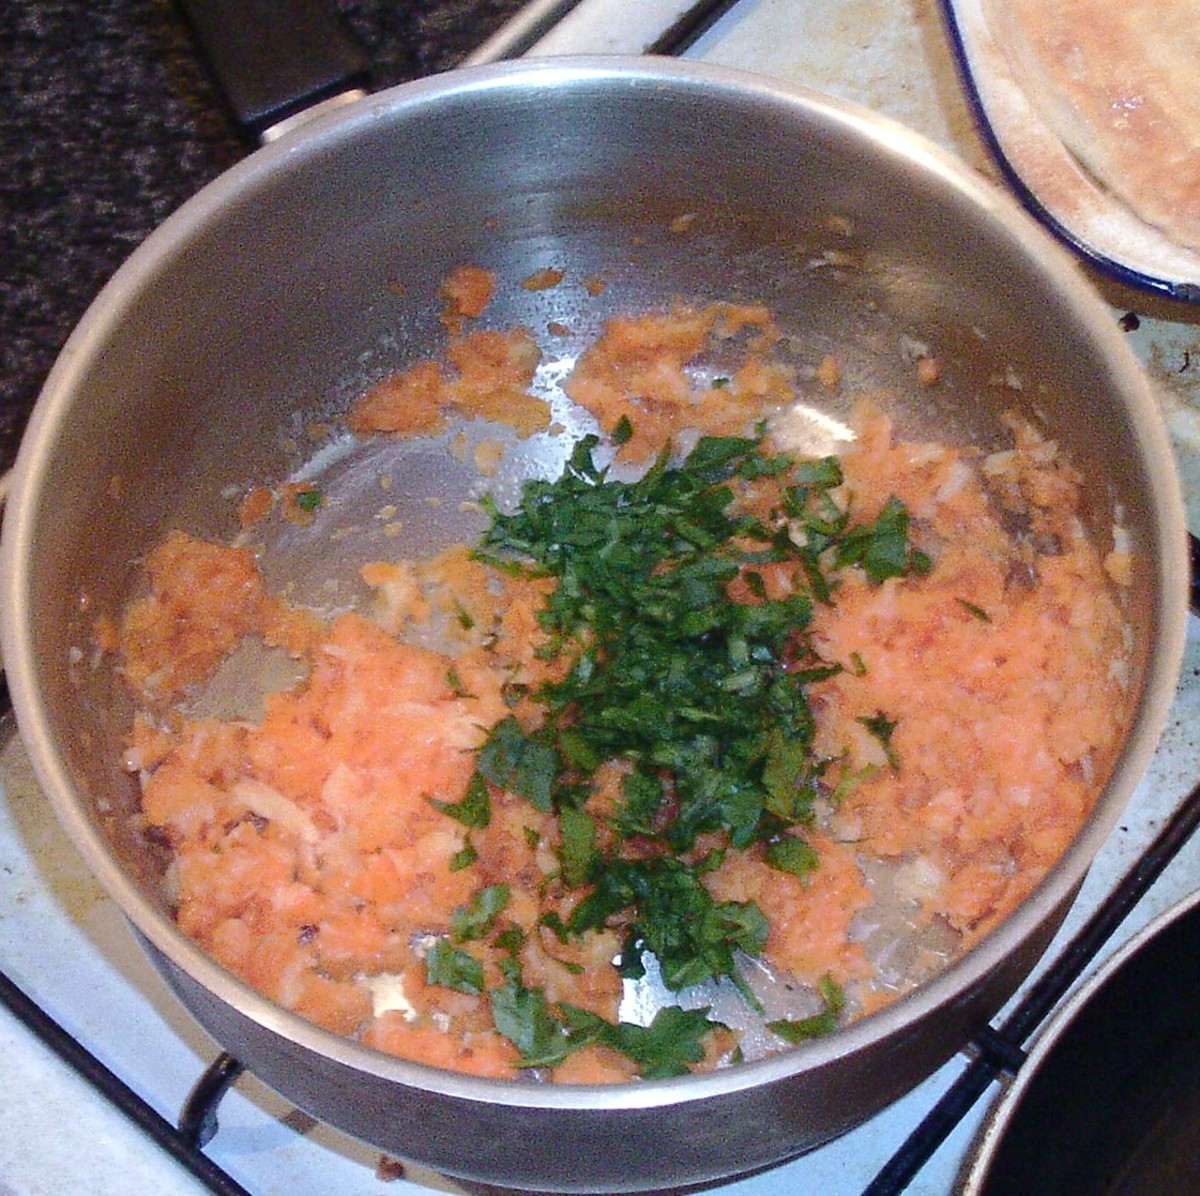 Chopped parsley is added to mashed carrot and parsnip